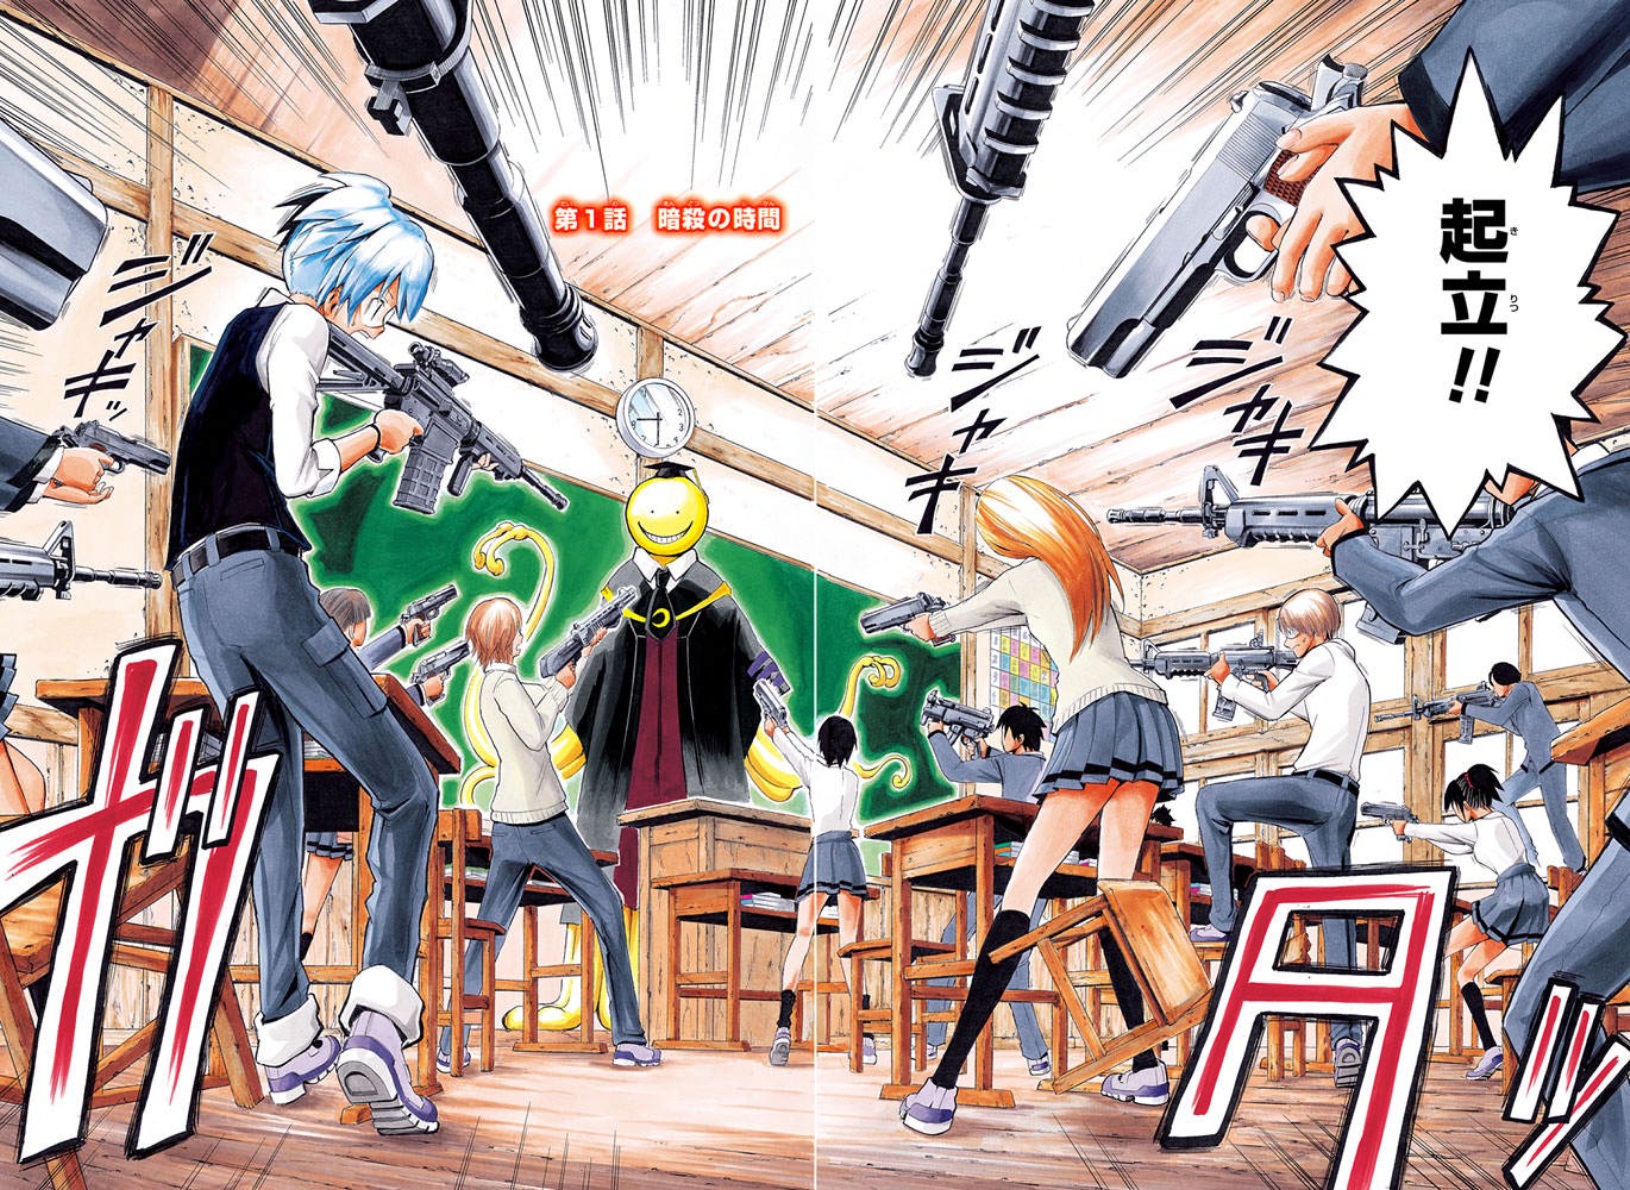 Assassination Classroom manga gets taken off school libraries in